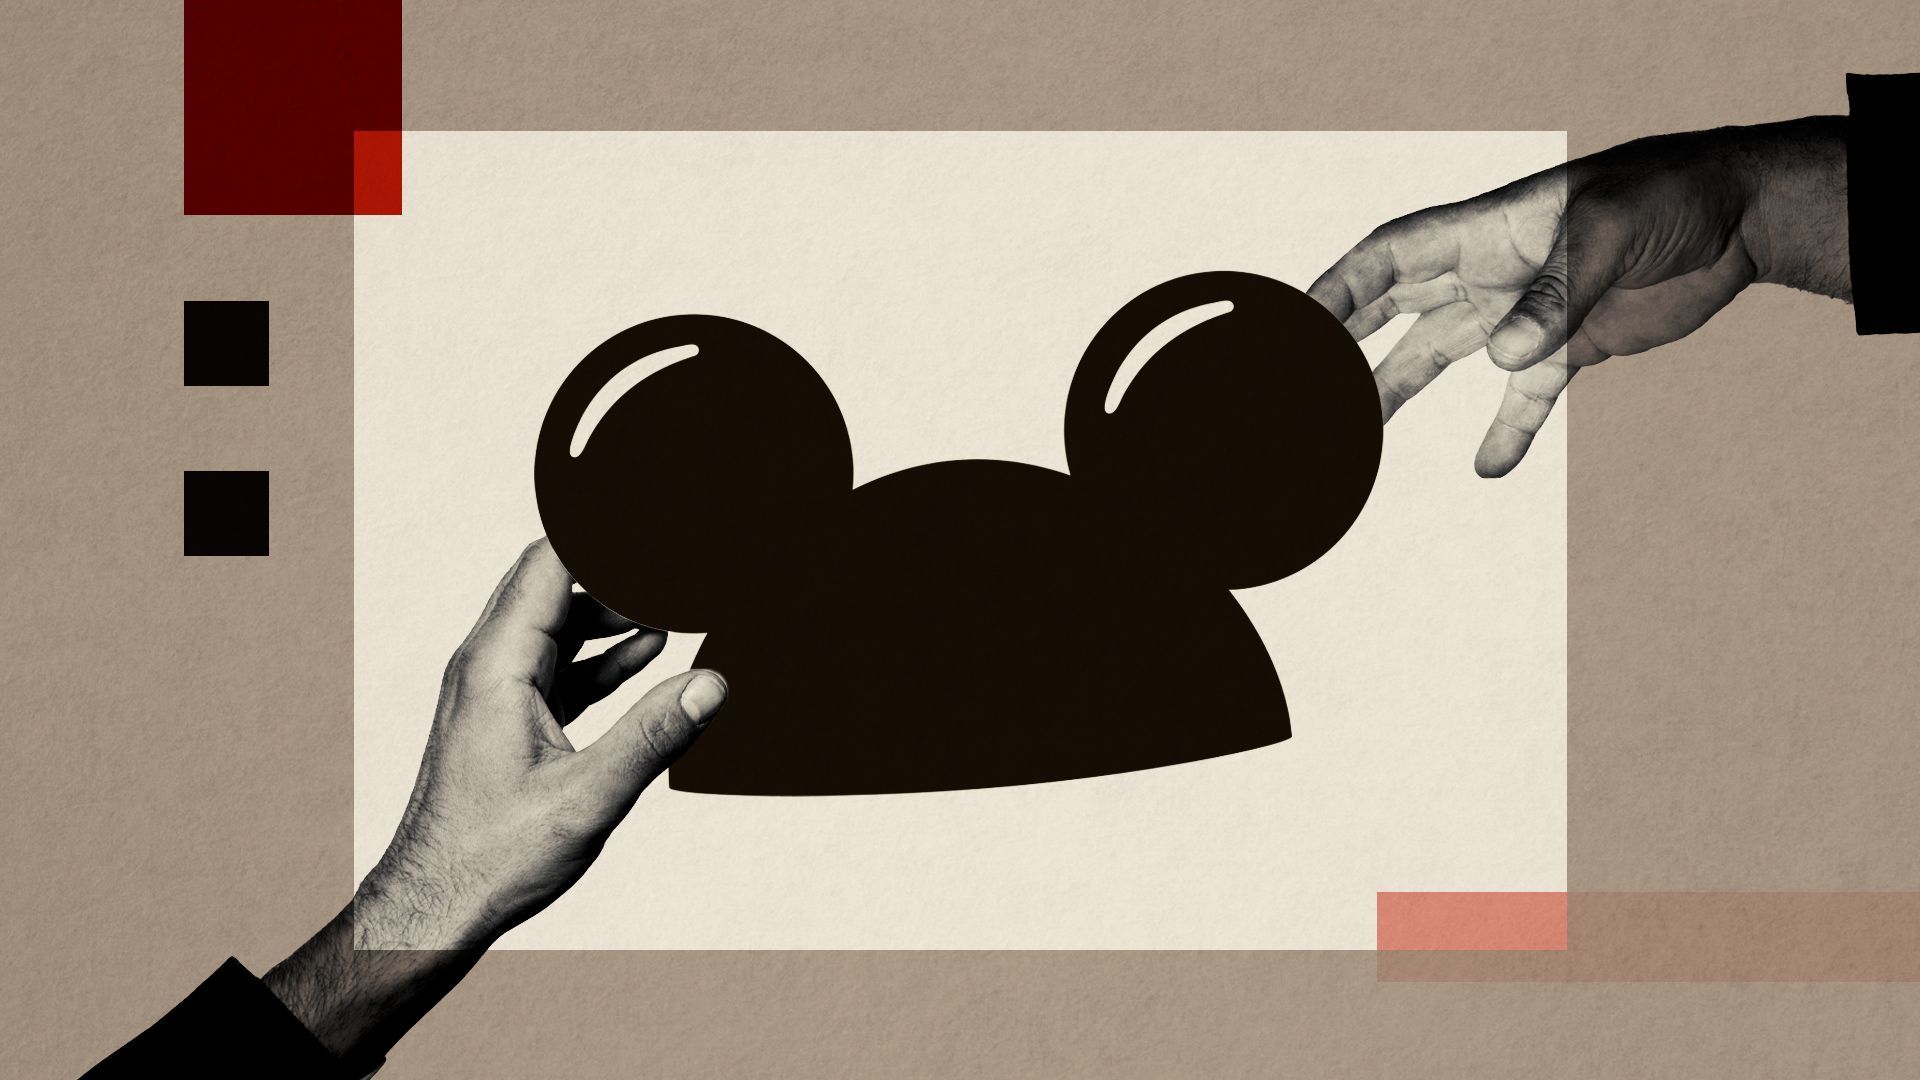 Illustration of two hands grabbing for a Mickey Mouse ears hat surrounded by abstract shapes.